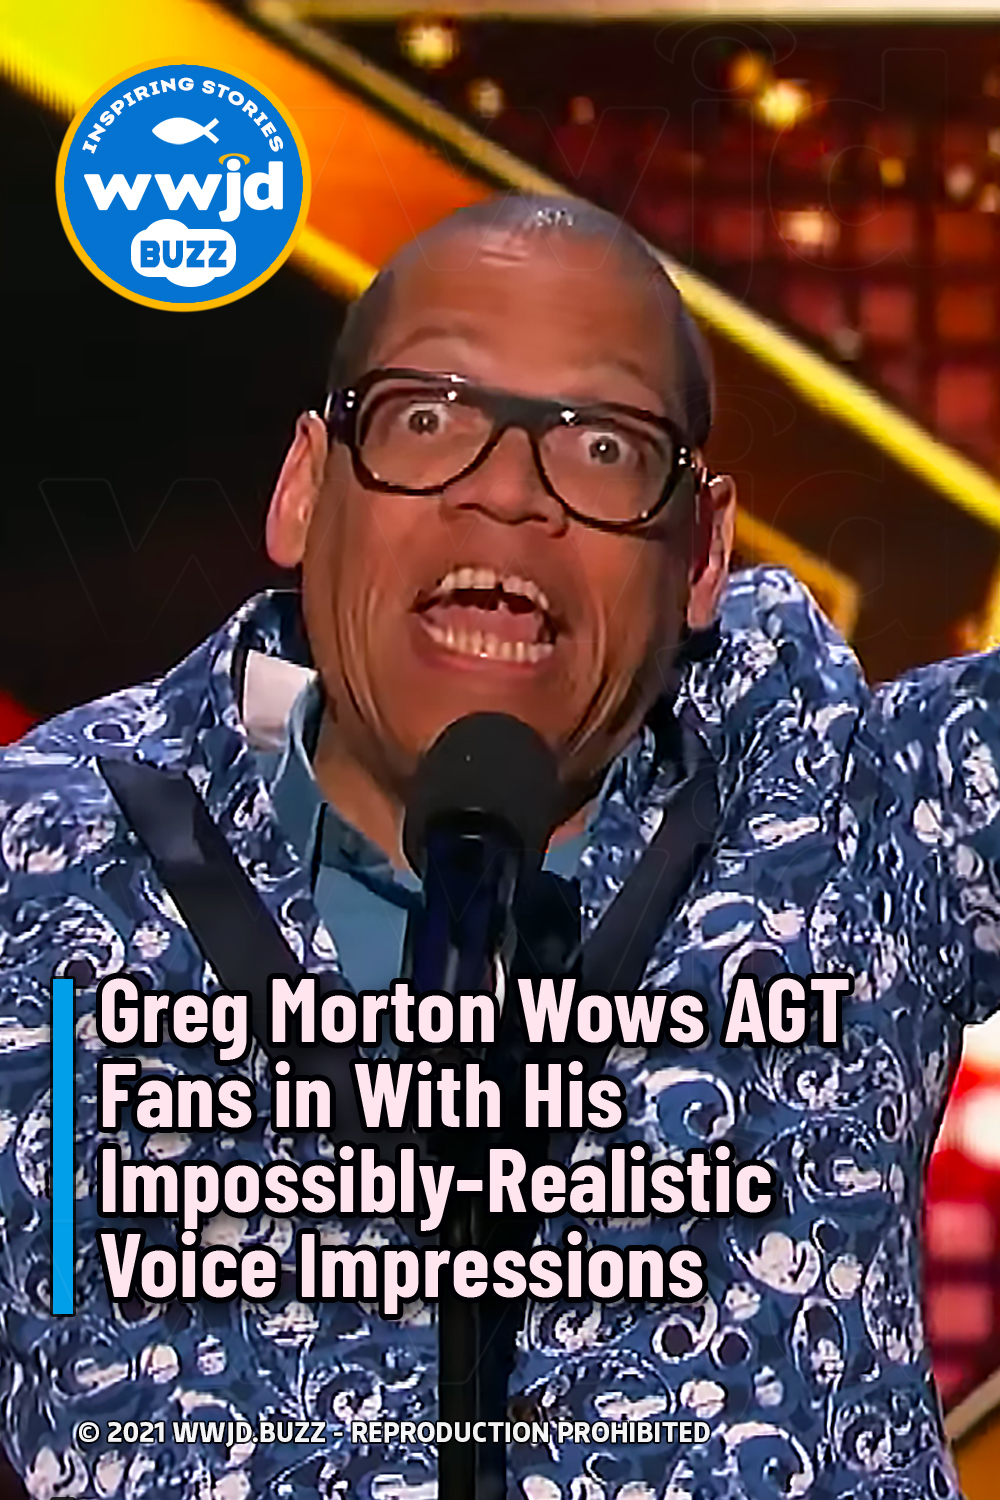 Greg Morton Wows AGT Fans in With His Impossibly-Realistic Voice Impressions